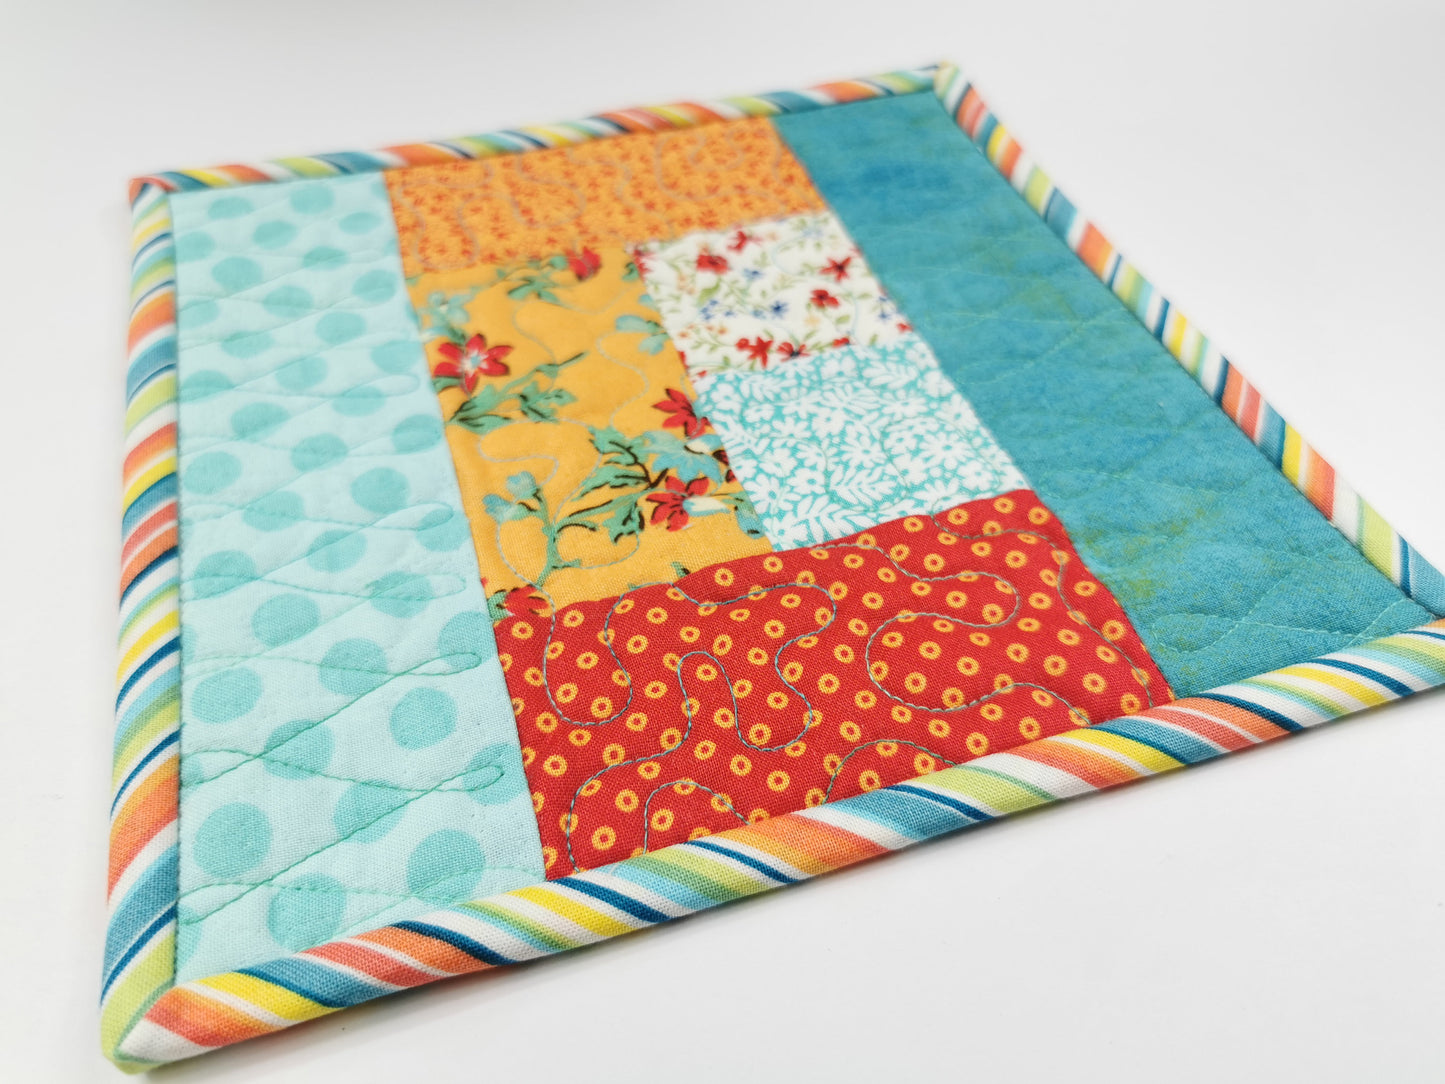 This cheerful quilted mug rug has bright summery colors of teal, white, orange, red.